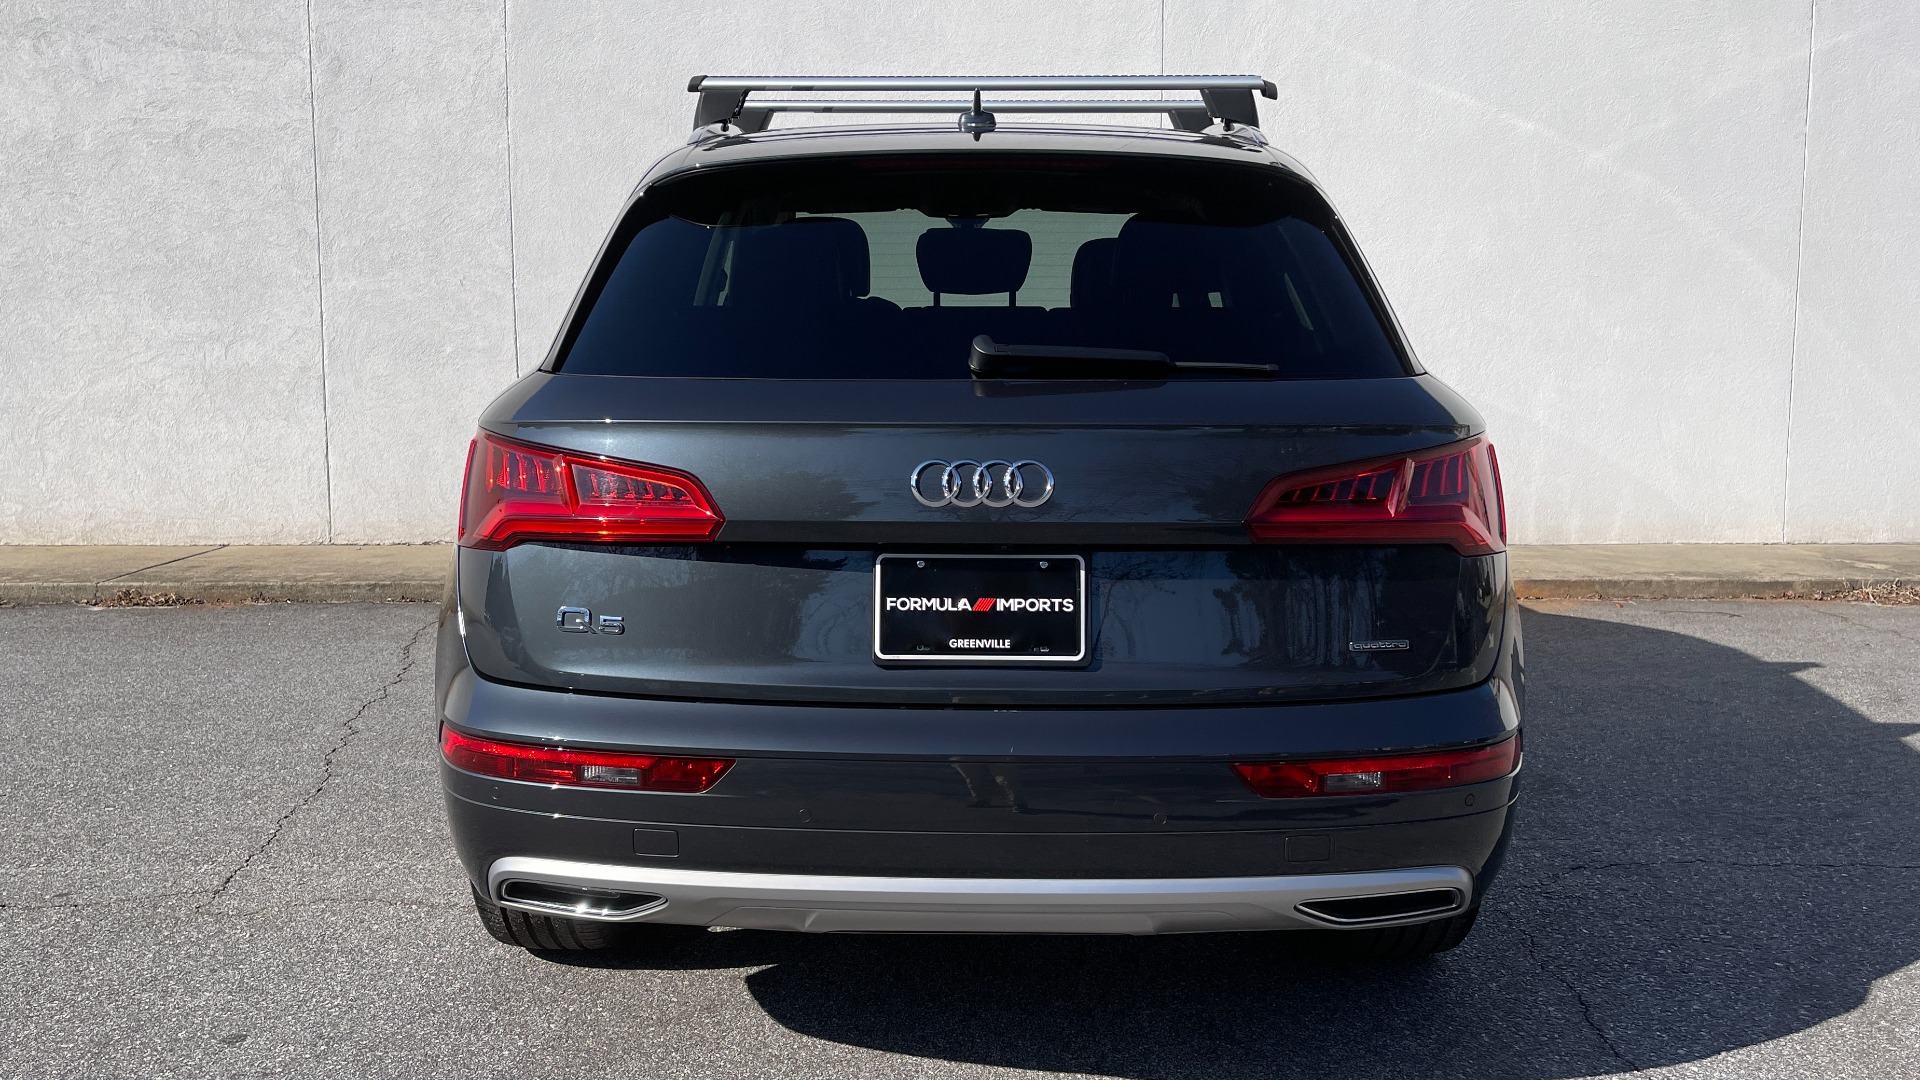 Used 2019 Audi Q5 PREMIUM PLUS / NAV / SUNROOF / WARM WTHR / PARK SYS PLUS / REARVIEW for sale $40,495 at Formula Imports in Charlotte NC 28227 16